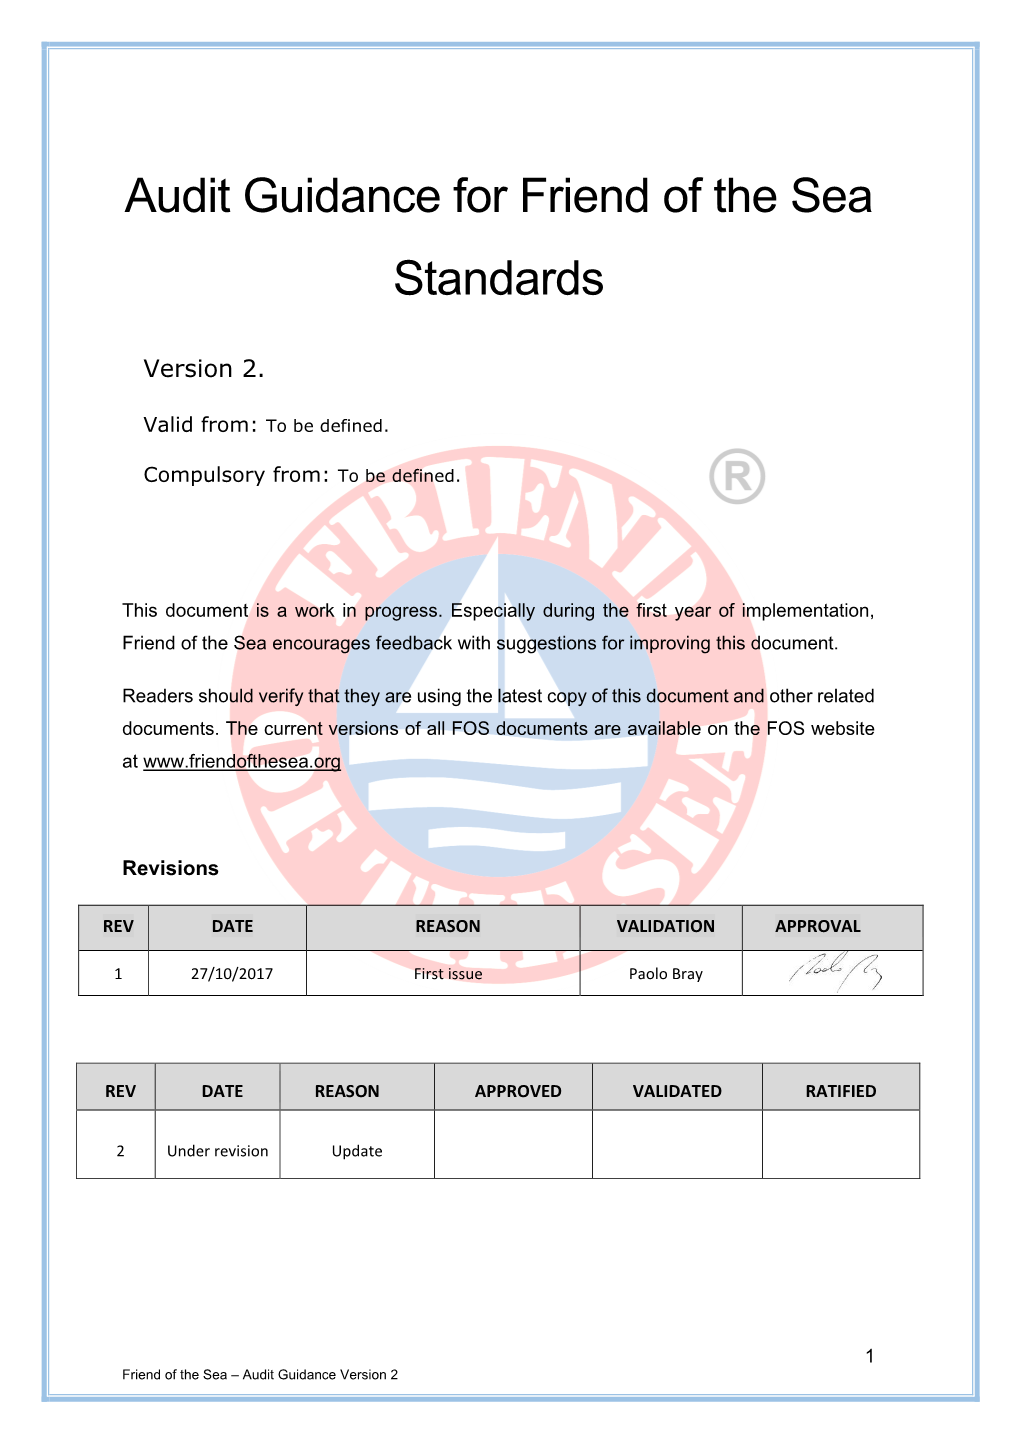 Audit Guidance for Friend of the Sea Standards